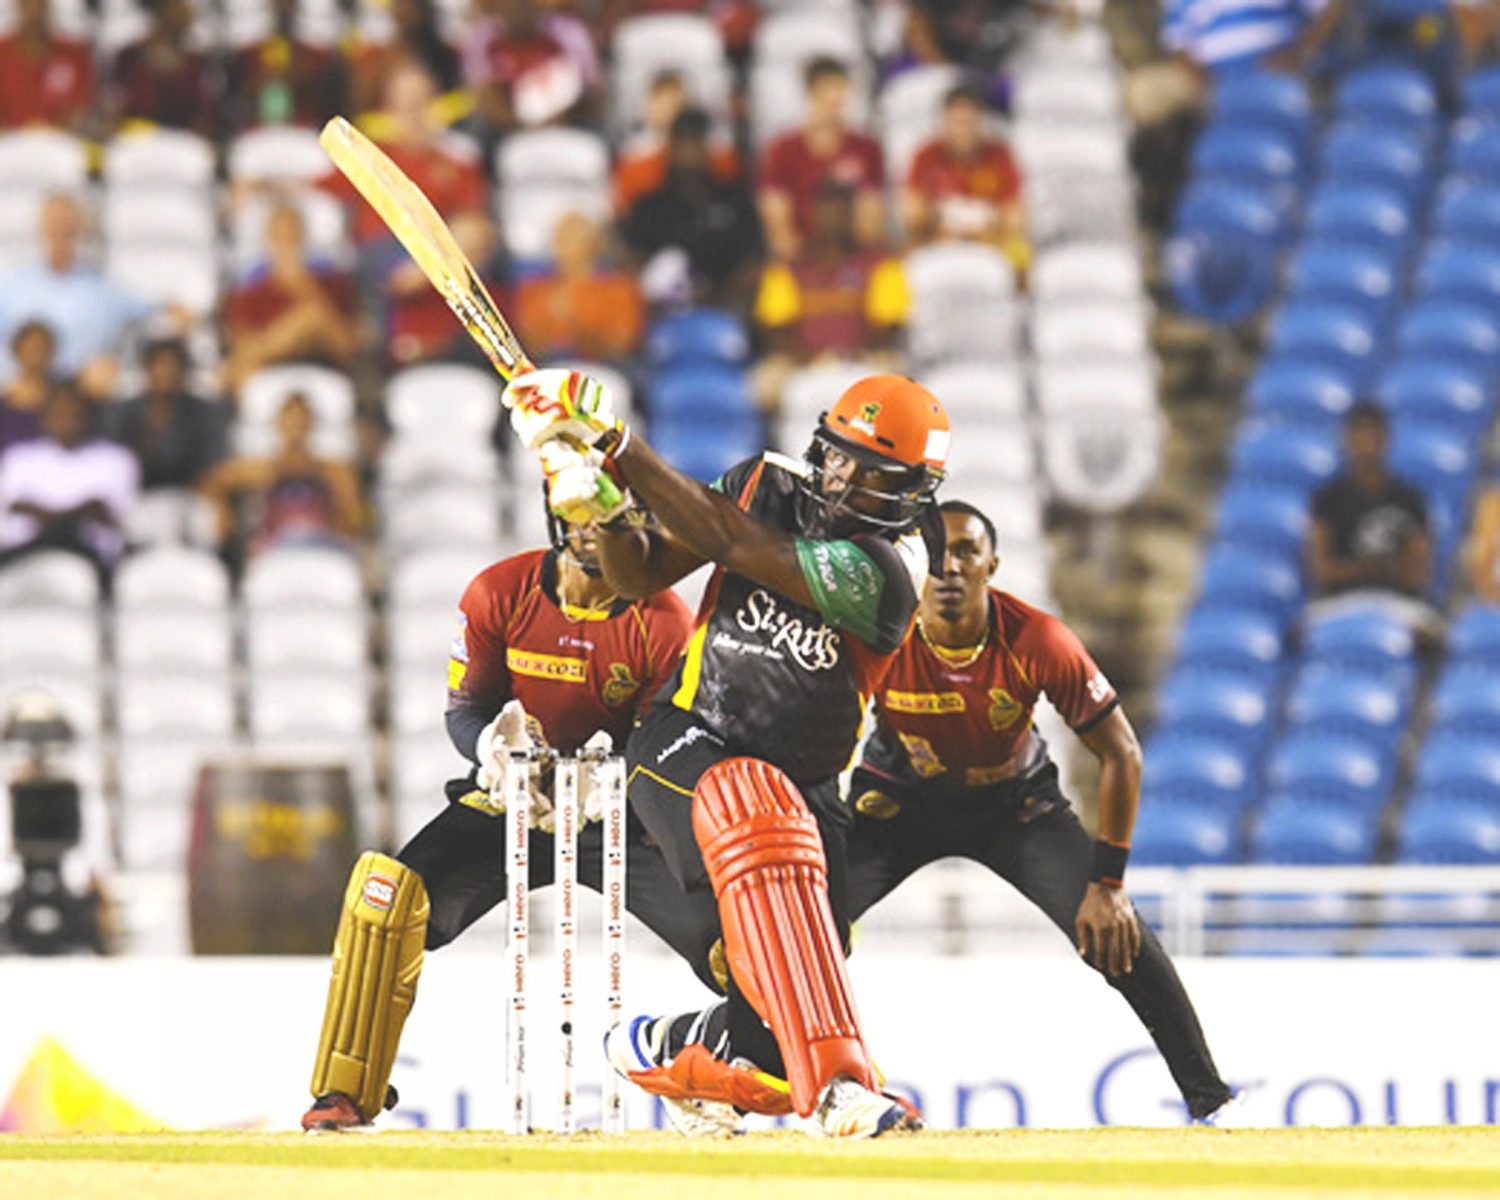 Chris Gayle held the St Kitts and Nevis Patriots innings together with an unbeaten knock of 54. A bove he hits a 6 during the Play Off Match of the 2017 Hero Caribbean Premier League between St Kitts & Nevis Patriots and Trinbago Knight Riders at Brian Lara Cricket Academy in Tarouba, Trinidad last night. (Photo by Randy Brooks - CPL T20 via Getty Images)